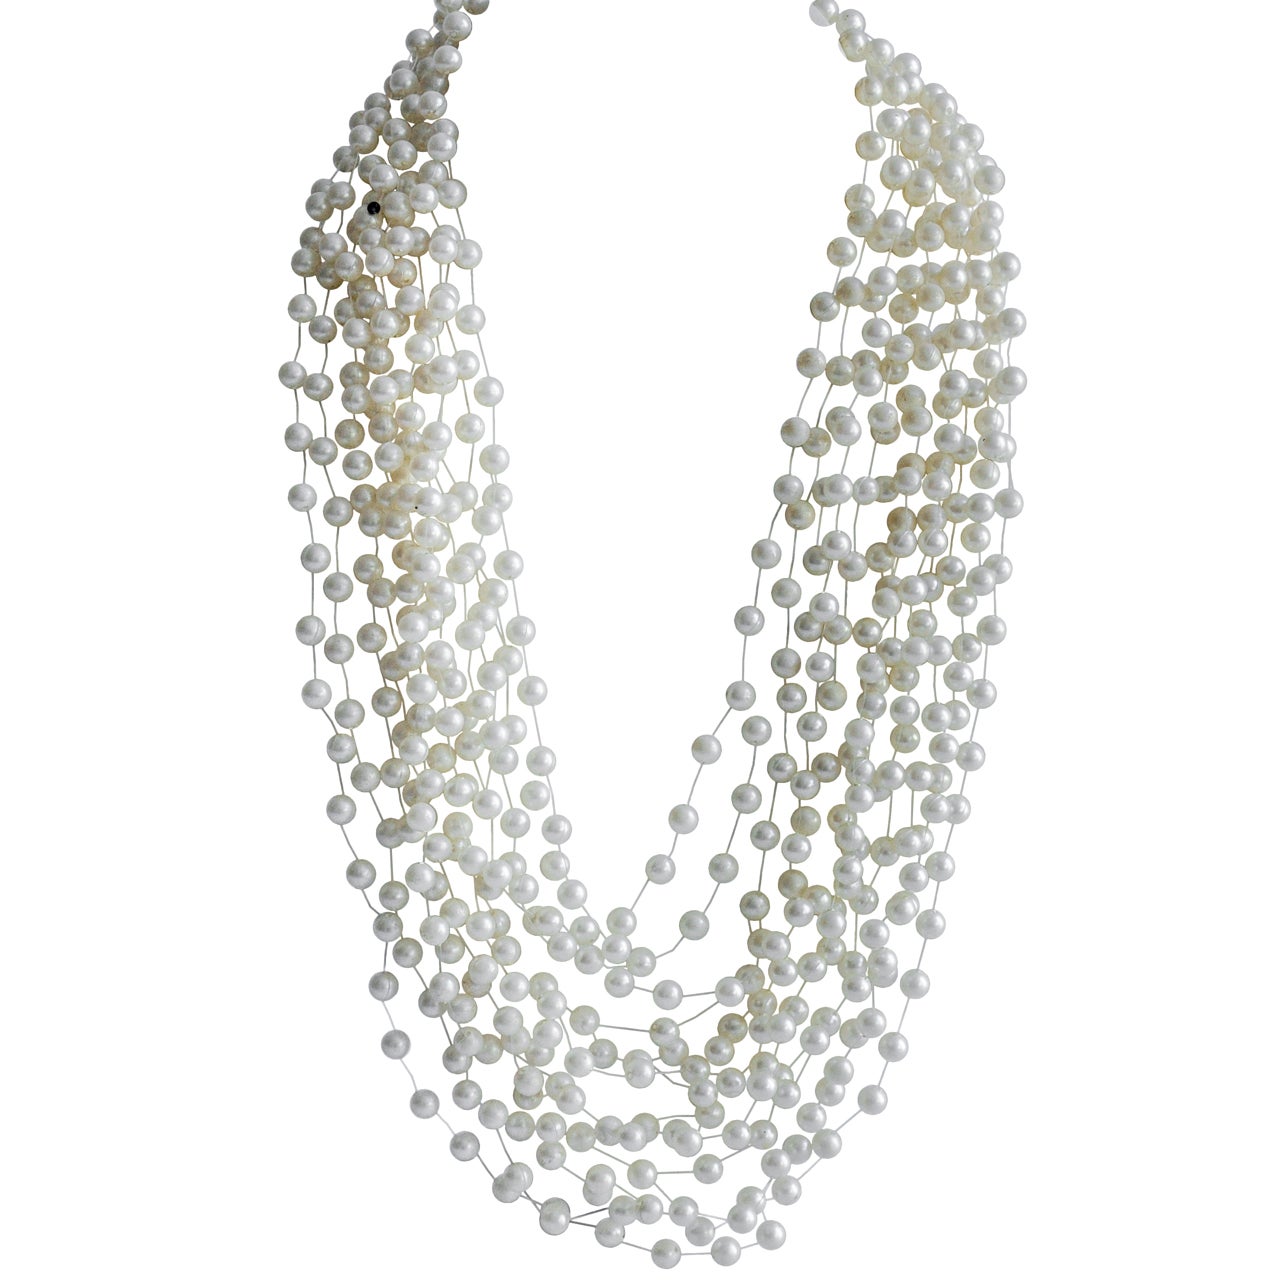 Multi-Strand Pearl Necklace by Langani